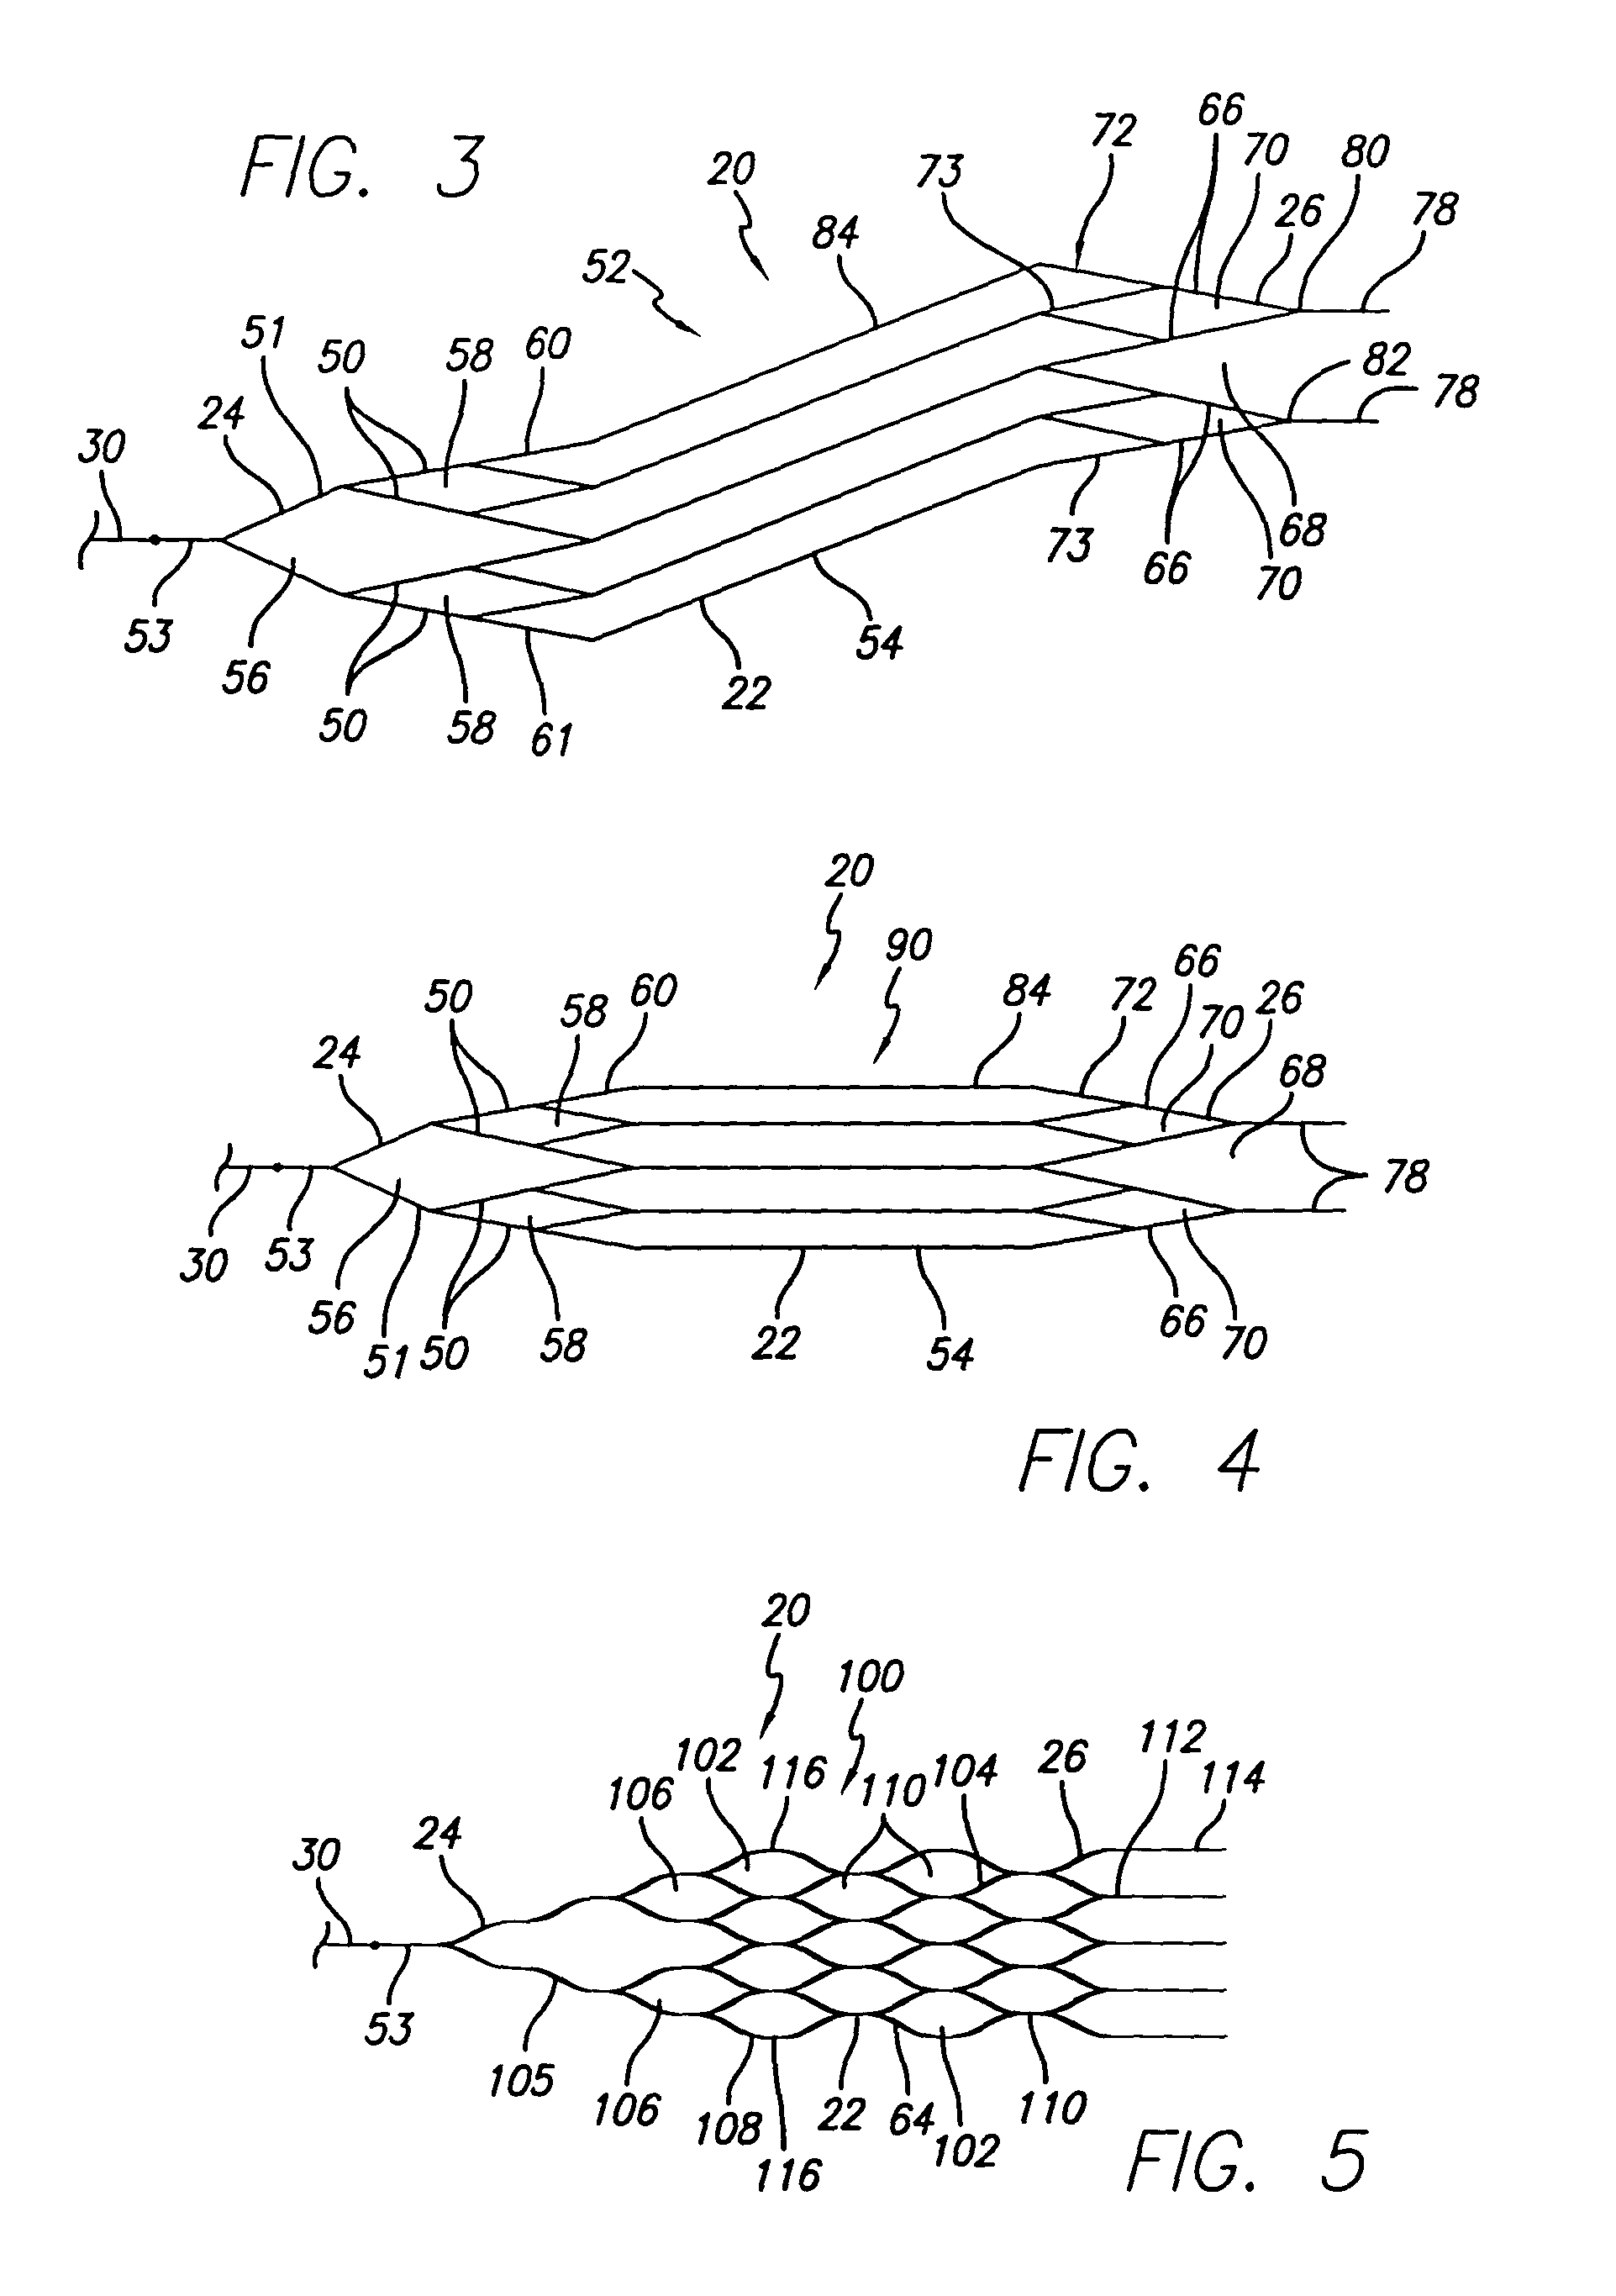 Intravascular device and system